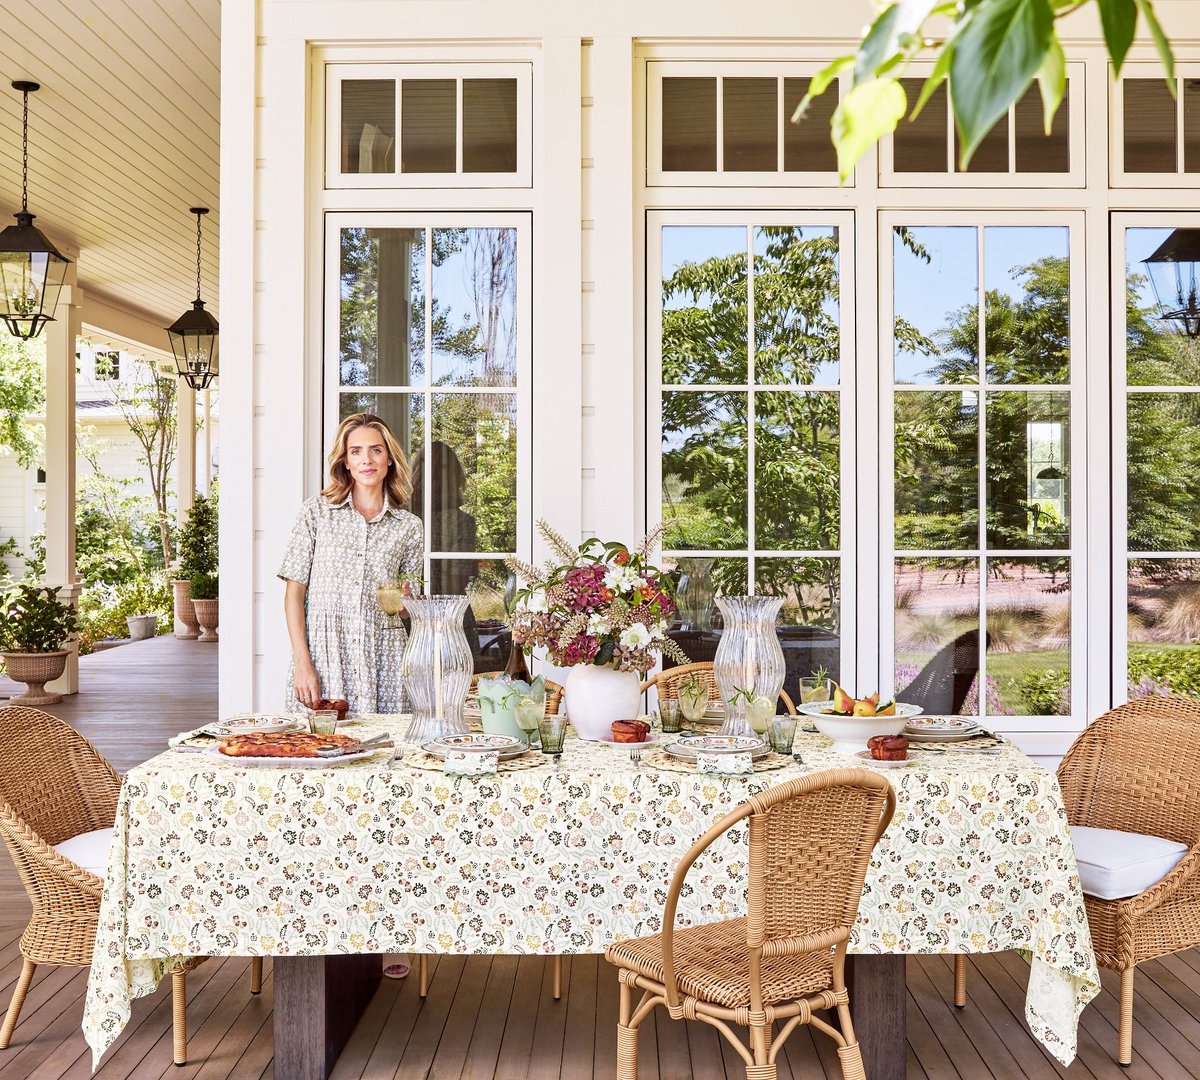 Julie Berolzheimer the designer, setting up an outdoor dining table for Pottery Barn. 